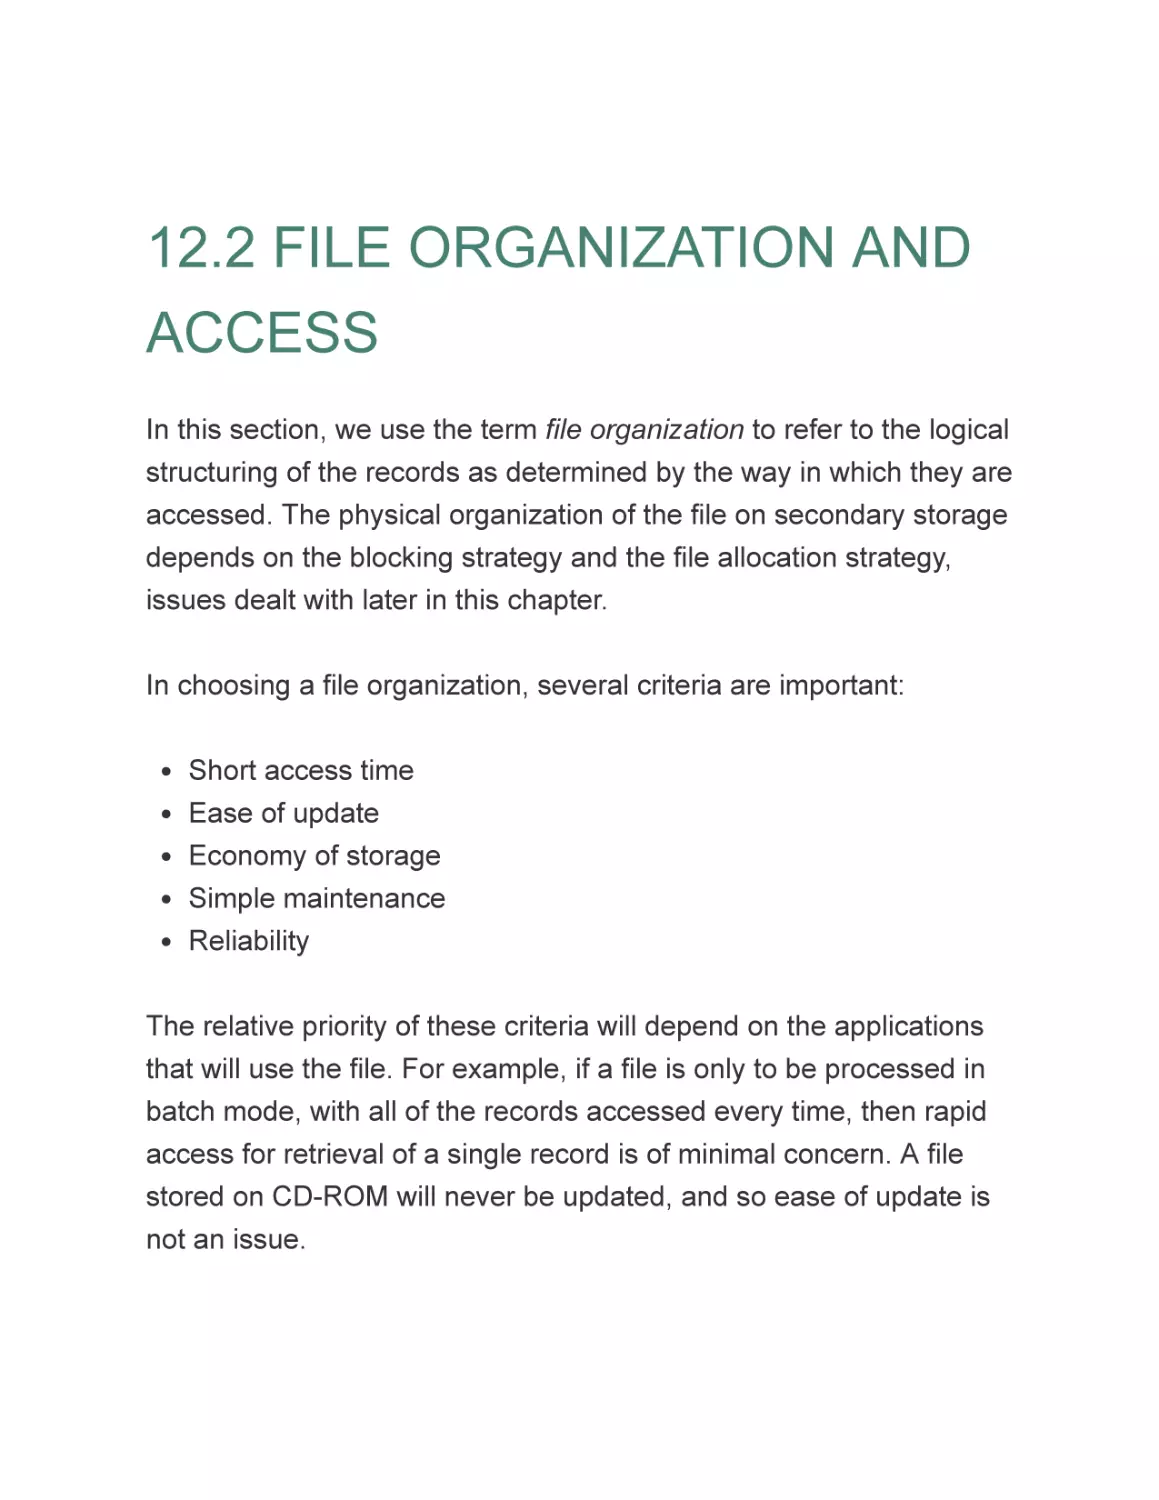 12.2 FILE ORGANIZATION AND ACCESS